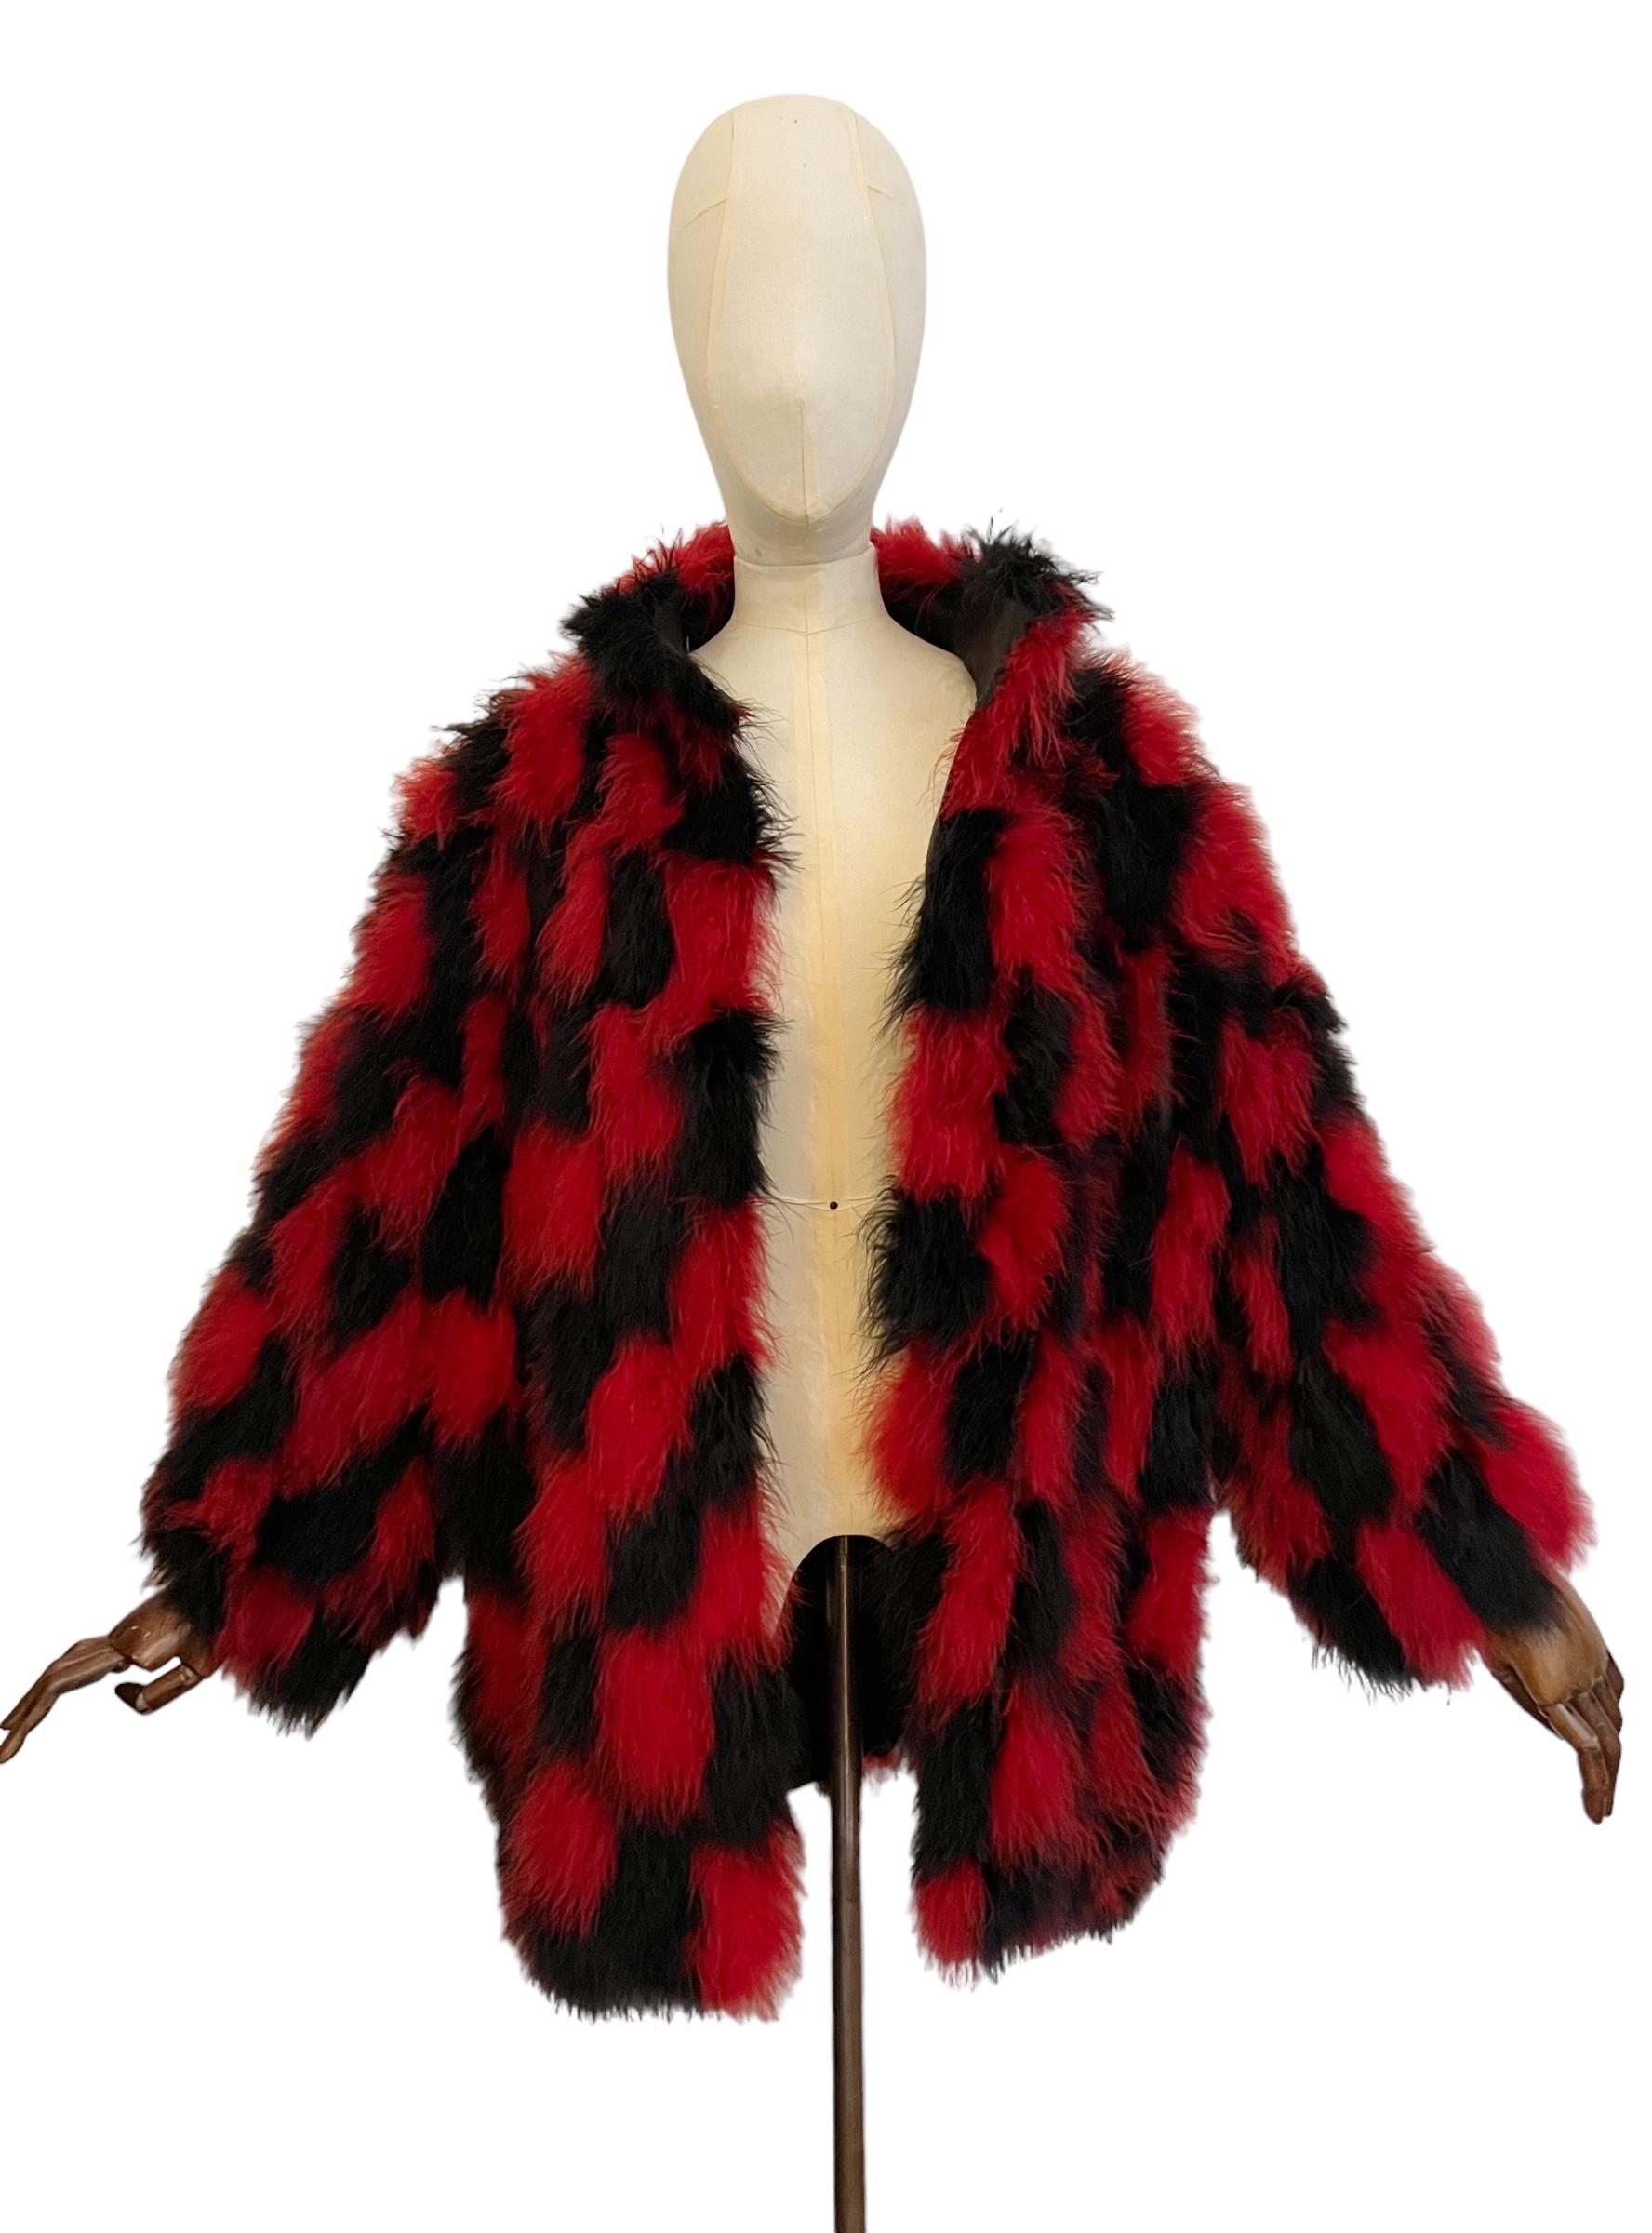 Vintage Christian Dior Haute Couture Ostrich Feather Marabou Jacket  2